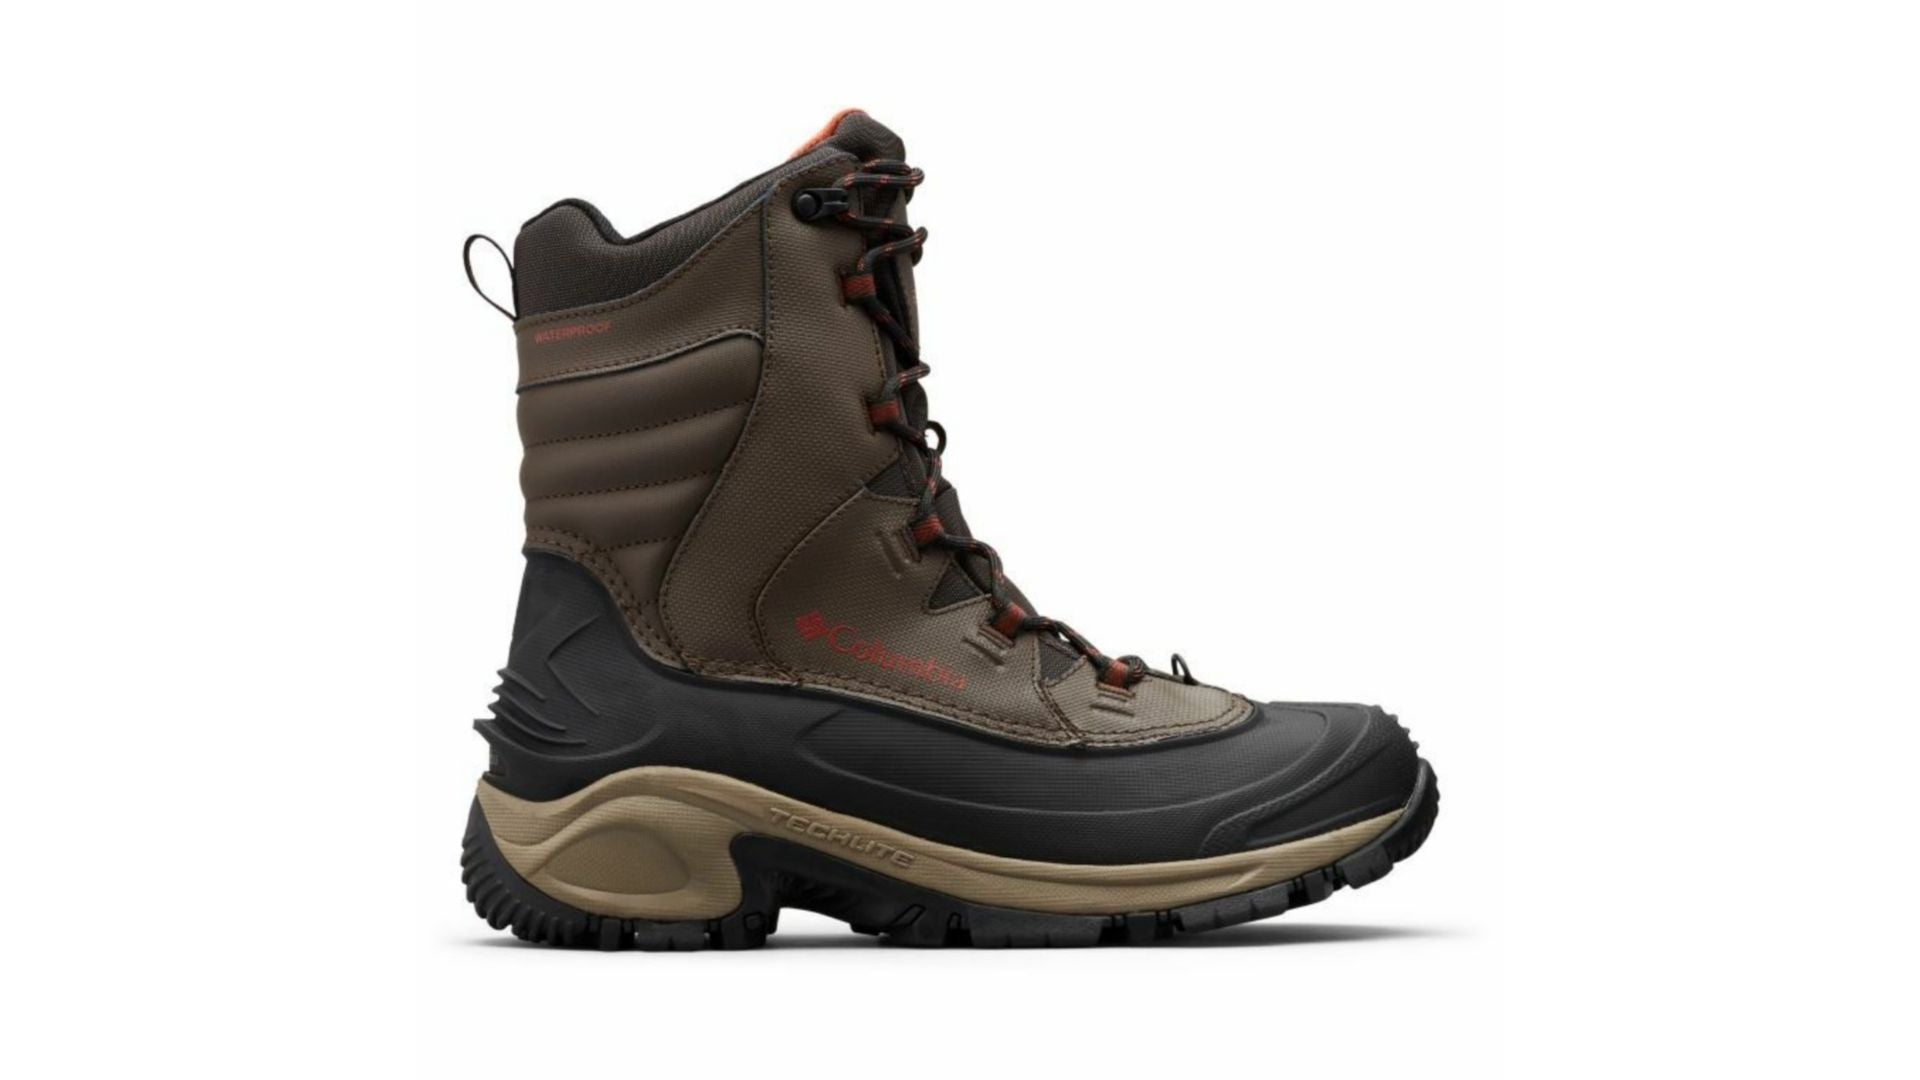 Caitin Mens Insulated Cold-Weather Boots Durable Hiking Boots Camel